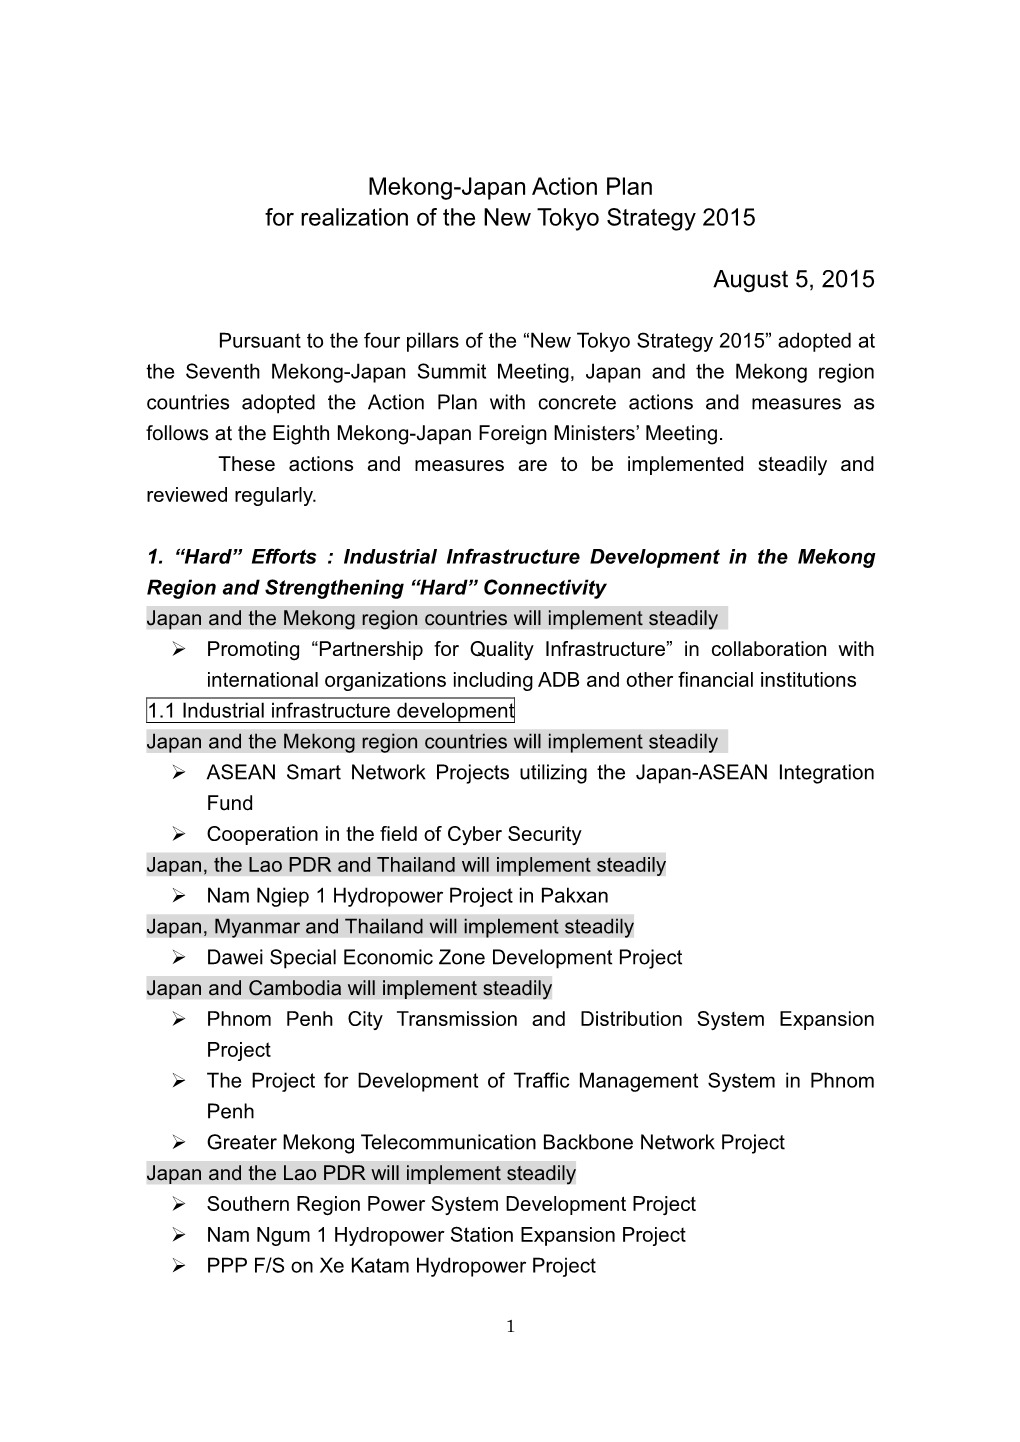 Mekong-Japan Action Plan for Realization of the New Tokyo Strategy 2015